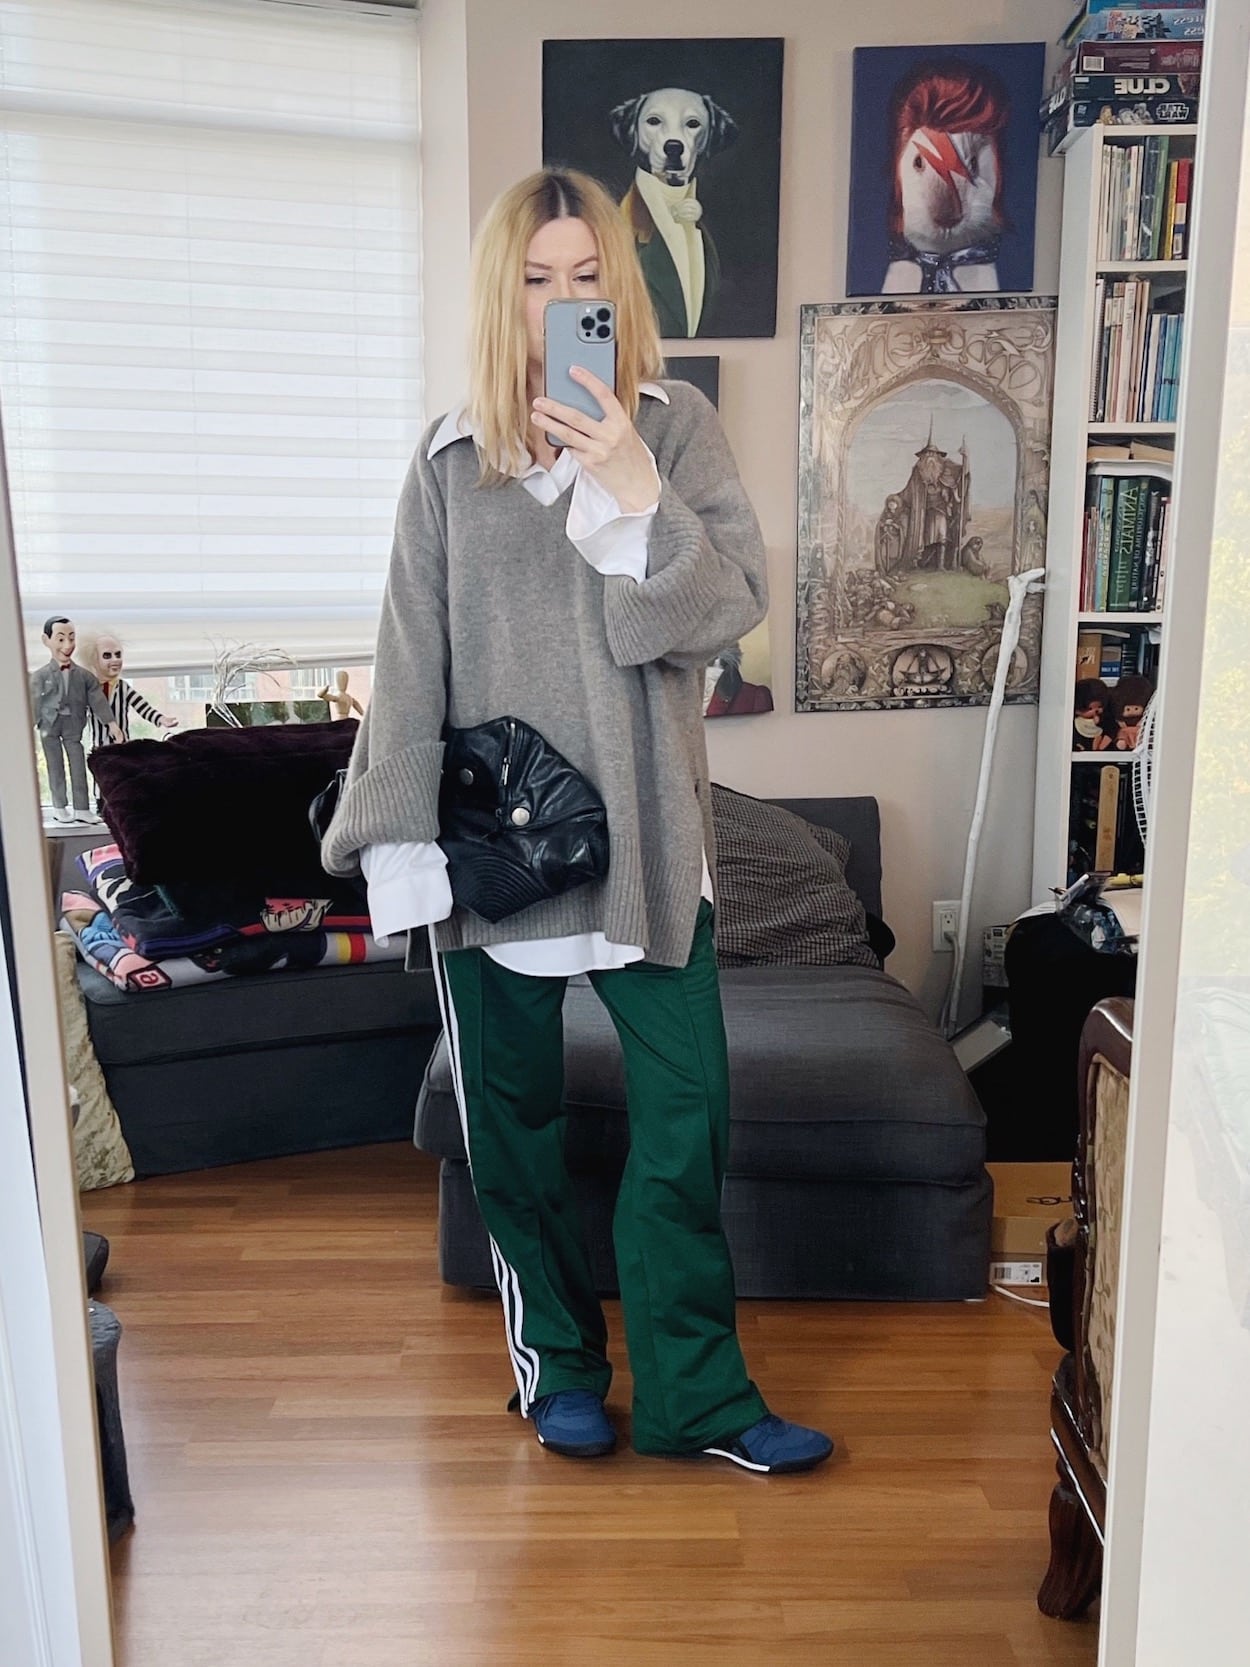 A blonde woman is wearing an oversized white button up layered under an oversized sweater, retro Adidas, Onitsuka Tiger sneakers, and an Alexander McQueen clutch.